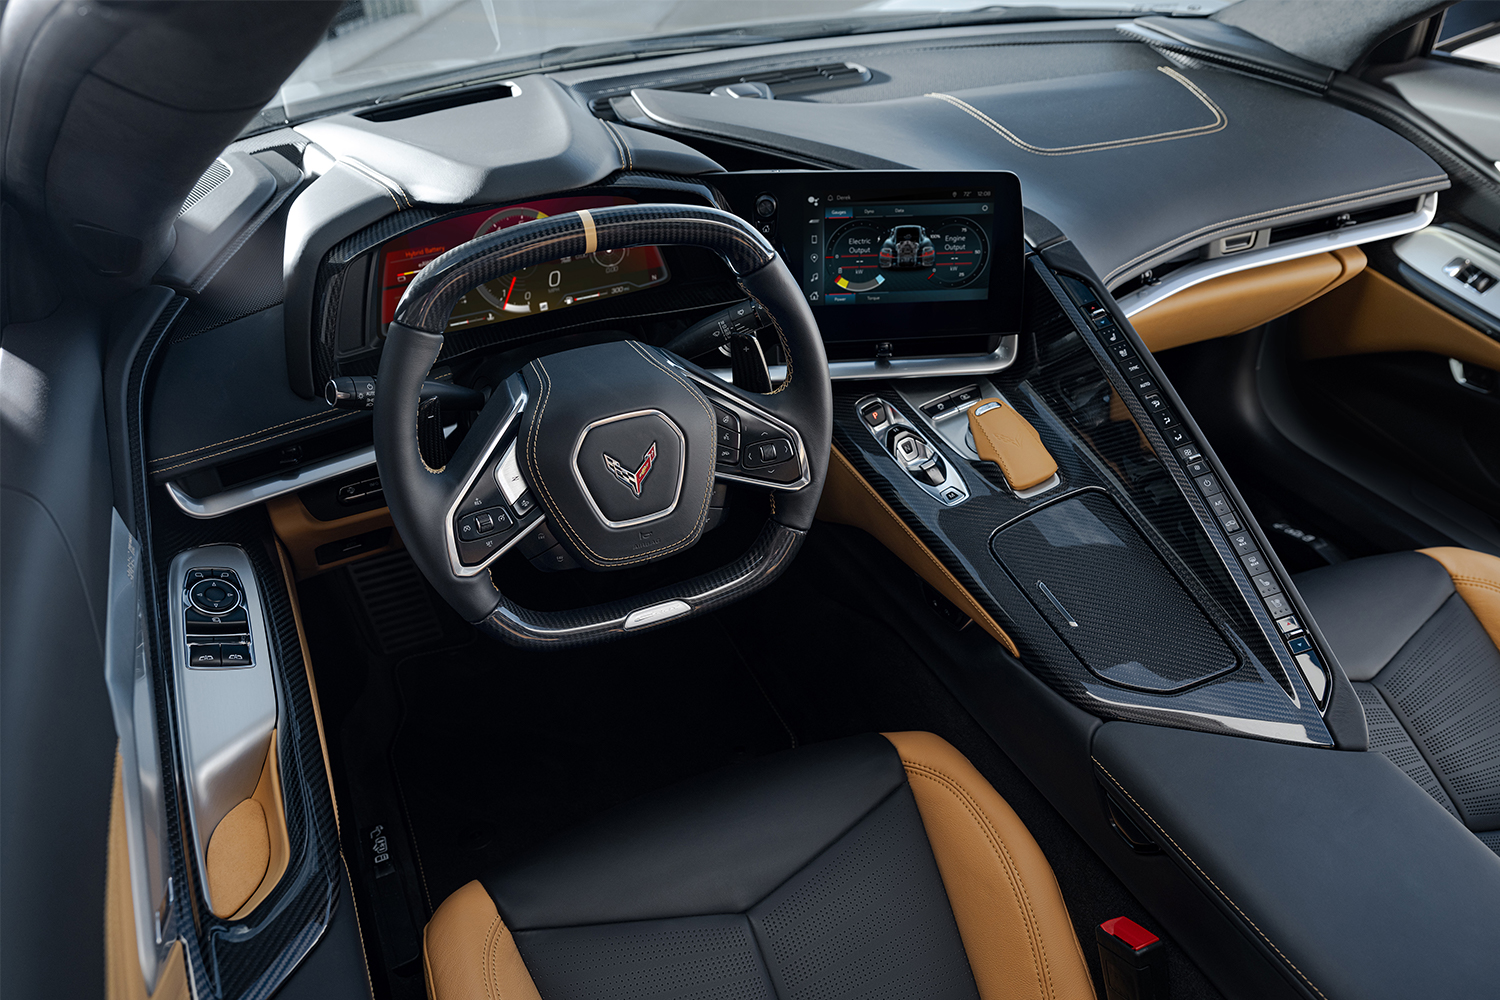 The interior of the new 2024 Chevrolet Corvette E-Ray, the first hybrid and all-wheel-drive Corvette